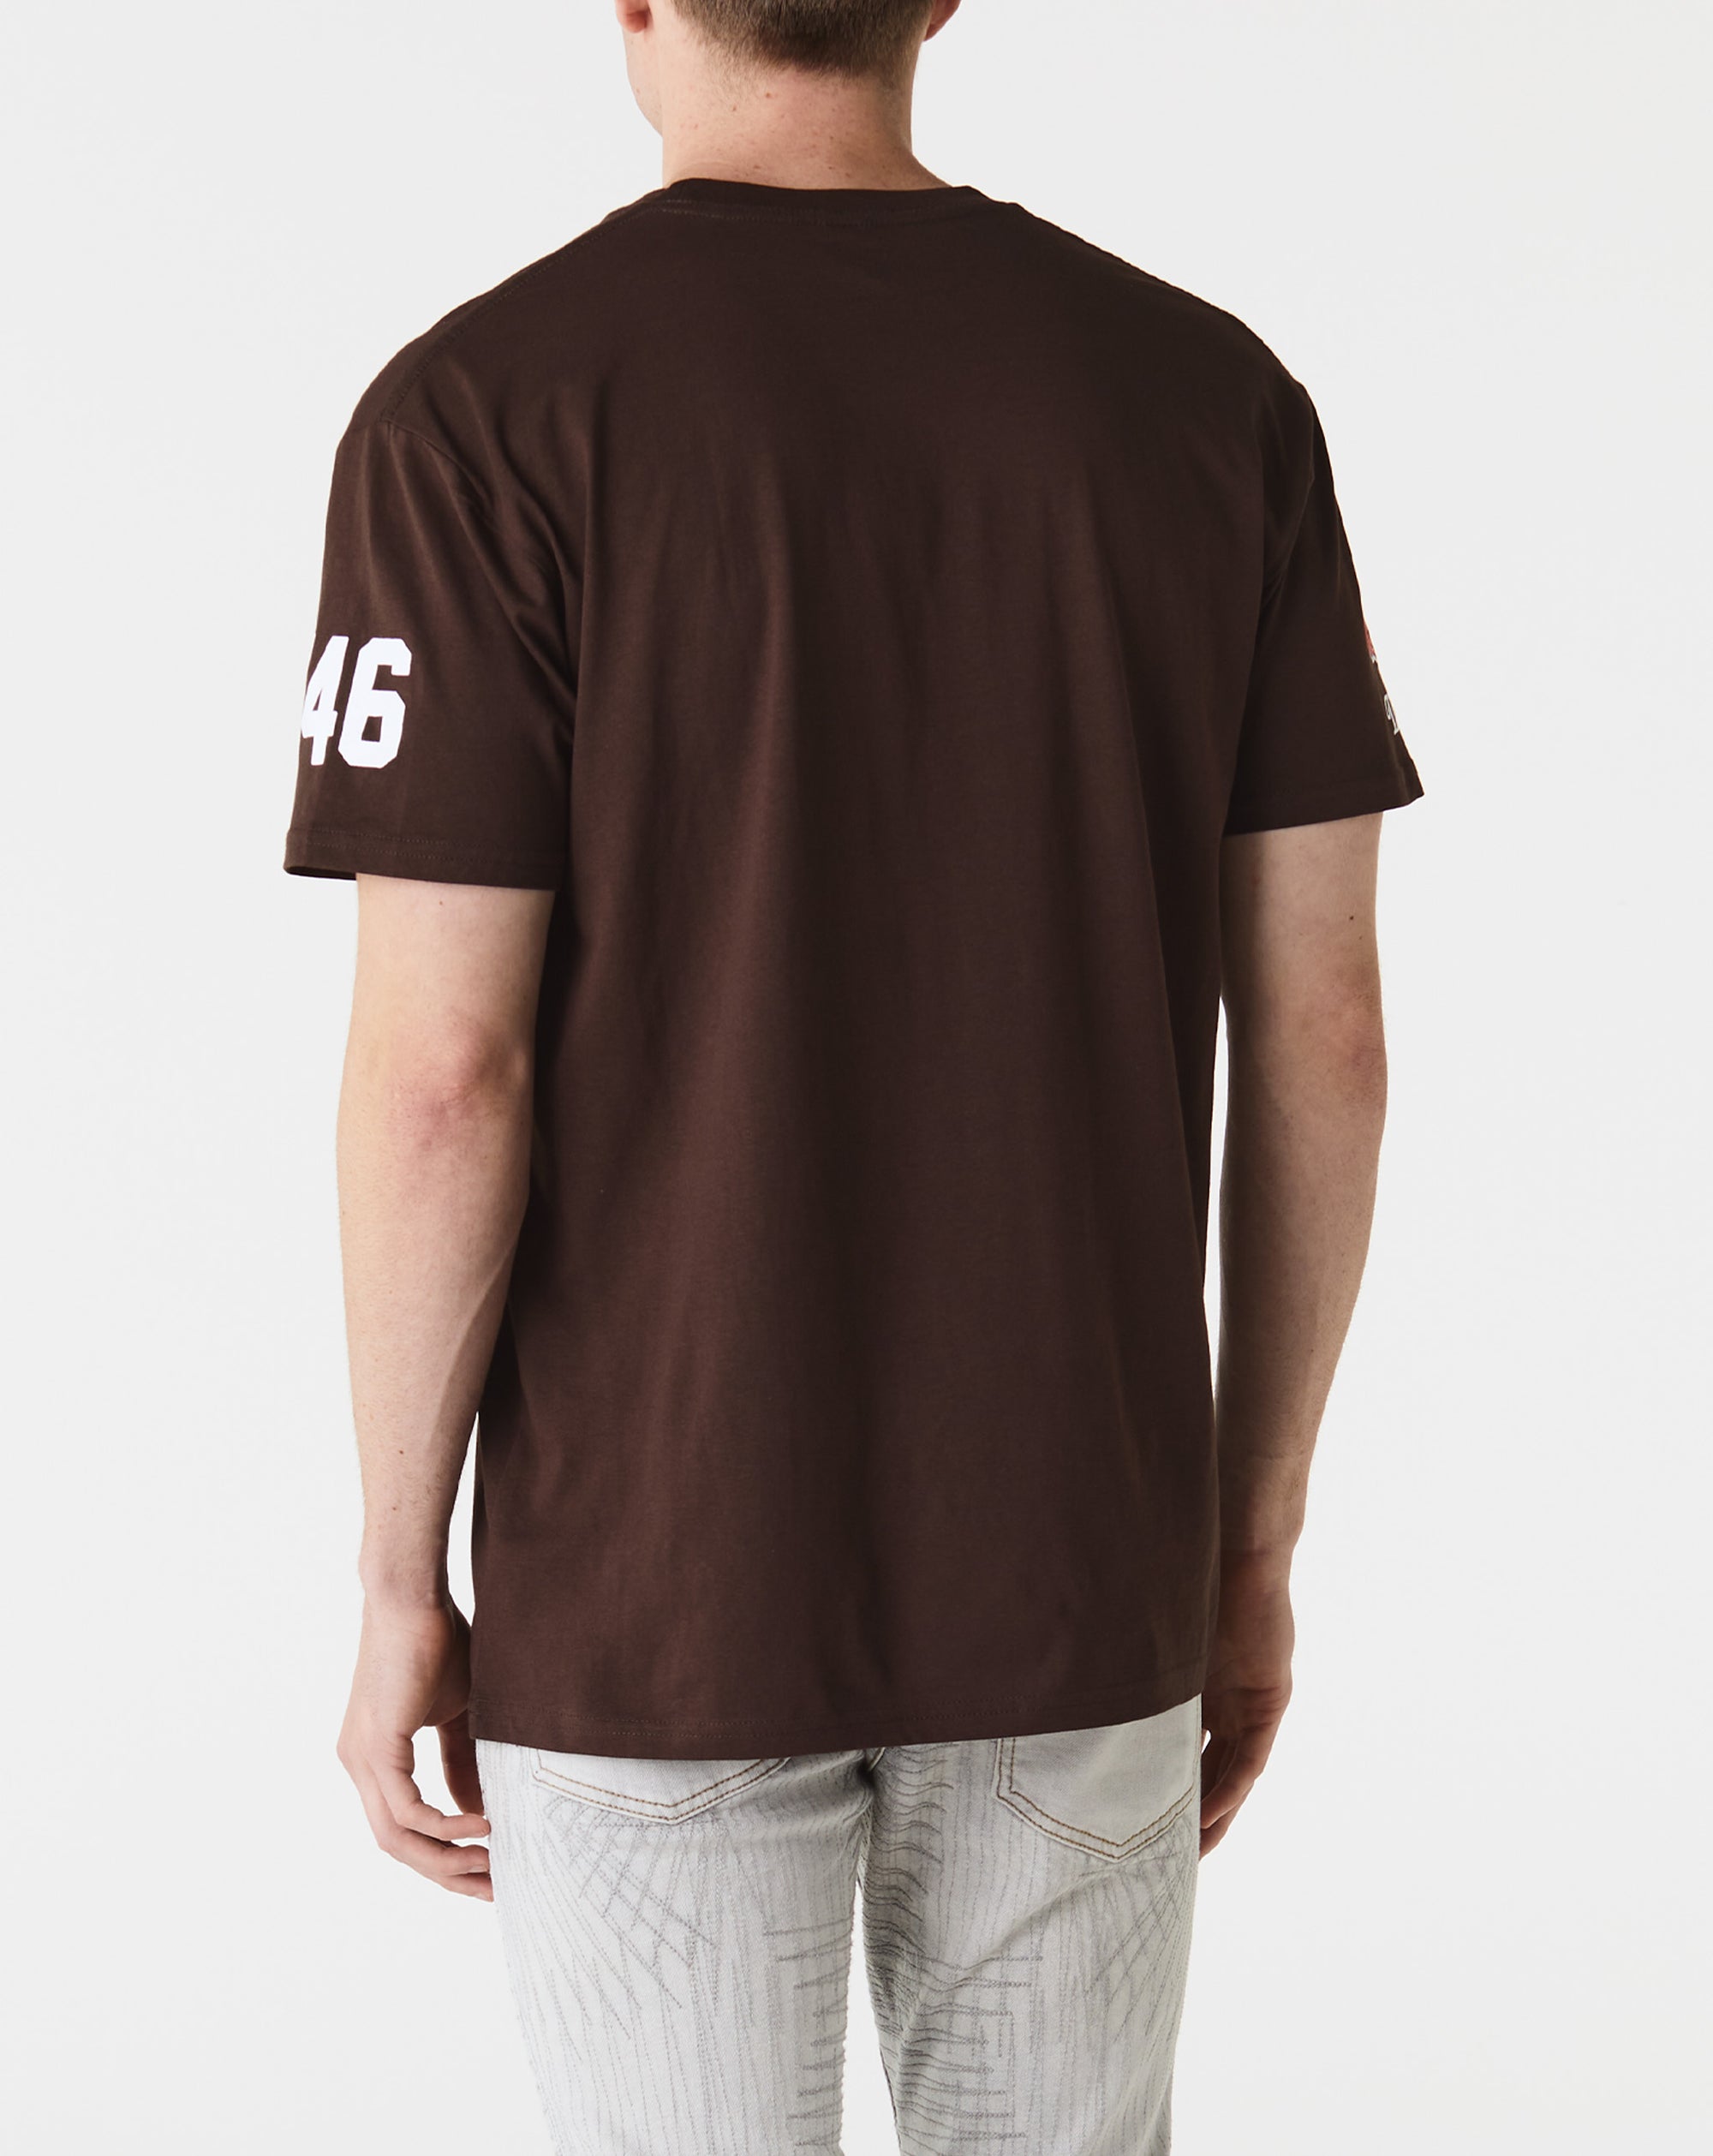 ilthy The Reason Browns T-Shirt - Rule of Next Apparel